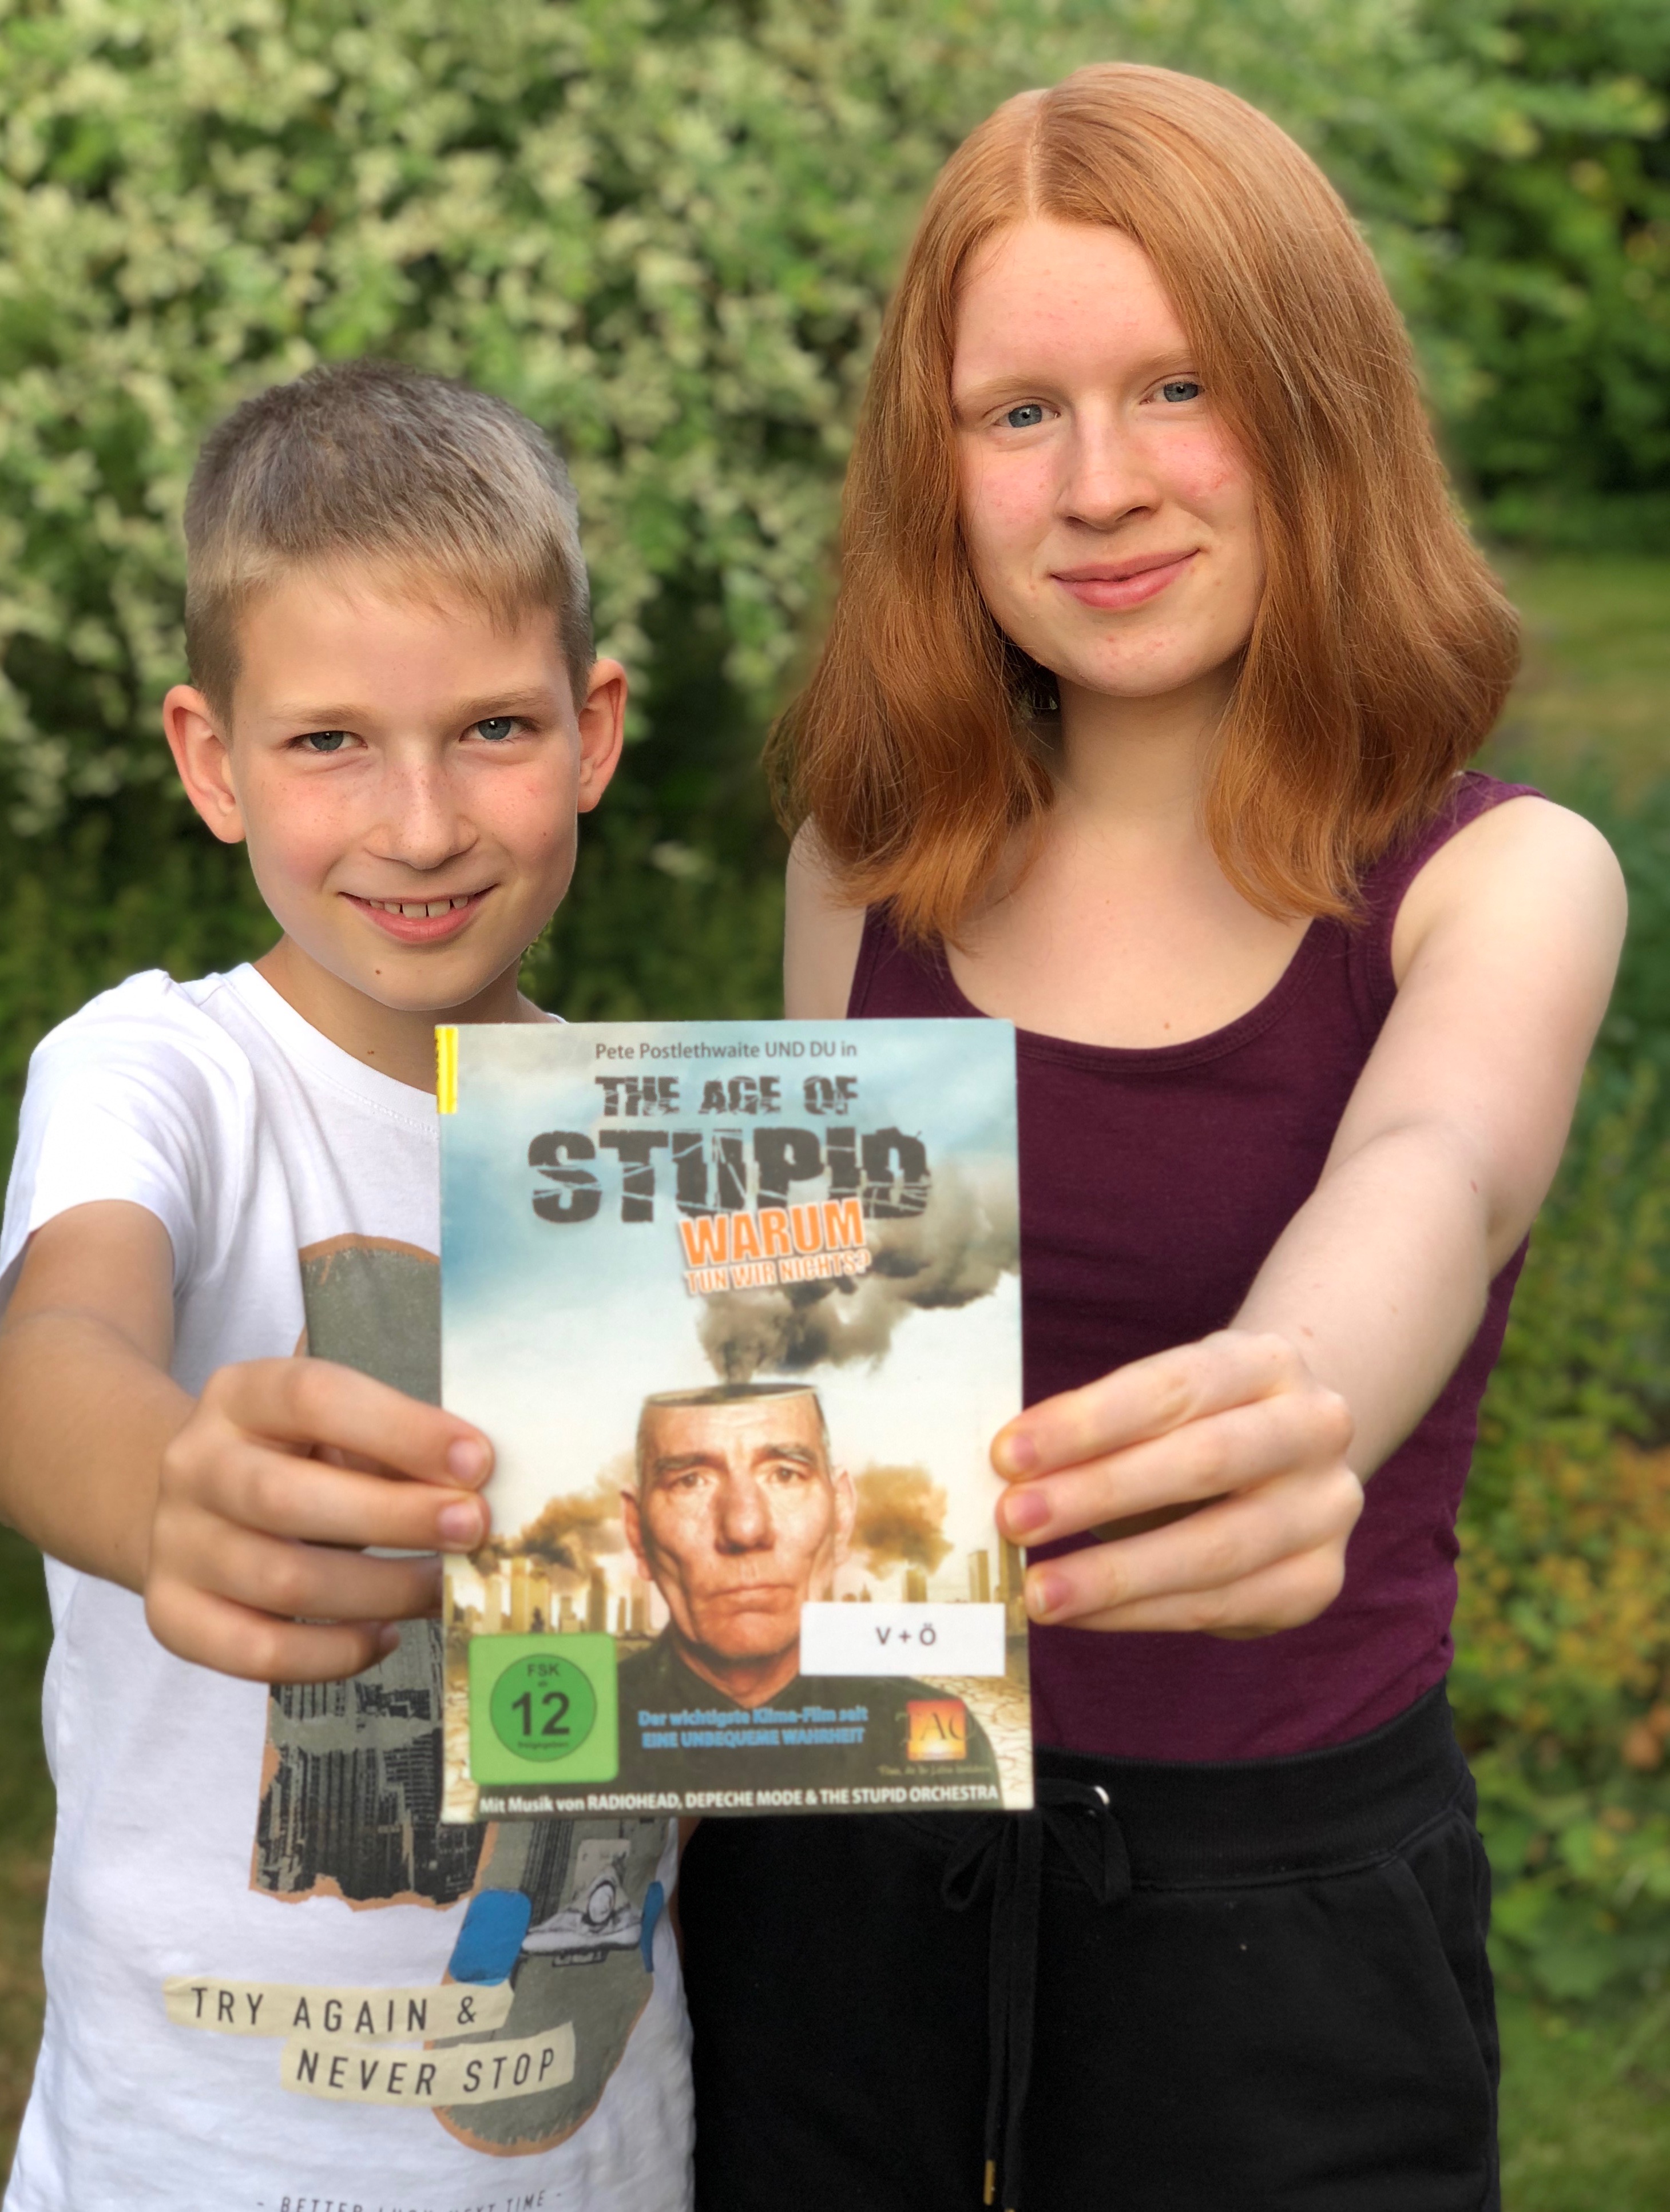 The Age of Stupid - Filmabend der Fridays for Future Enger